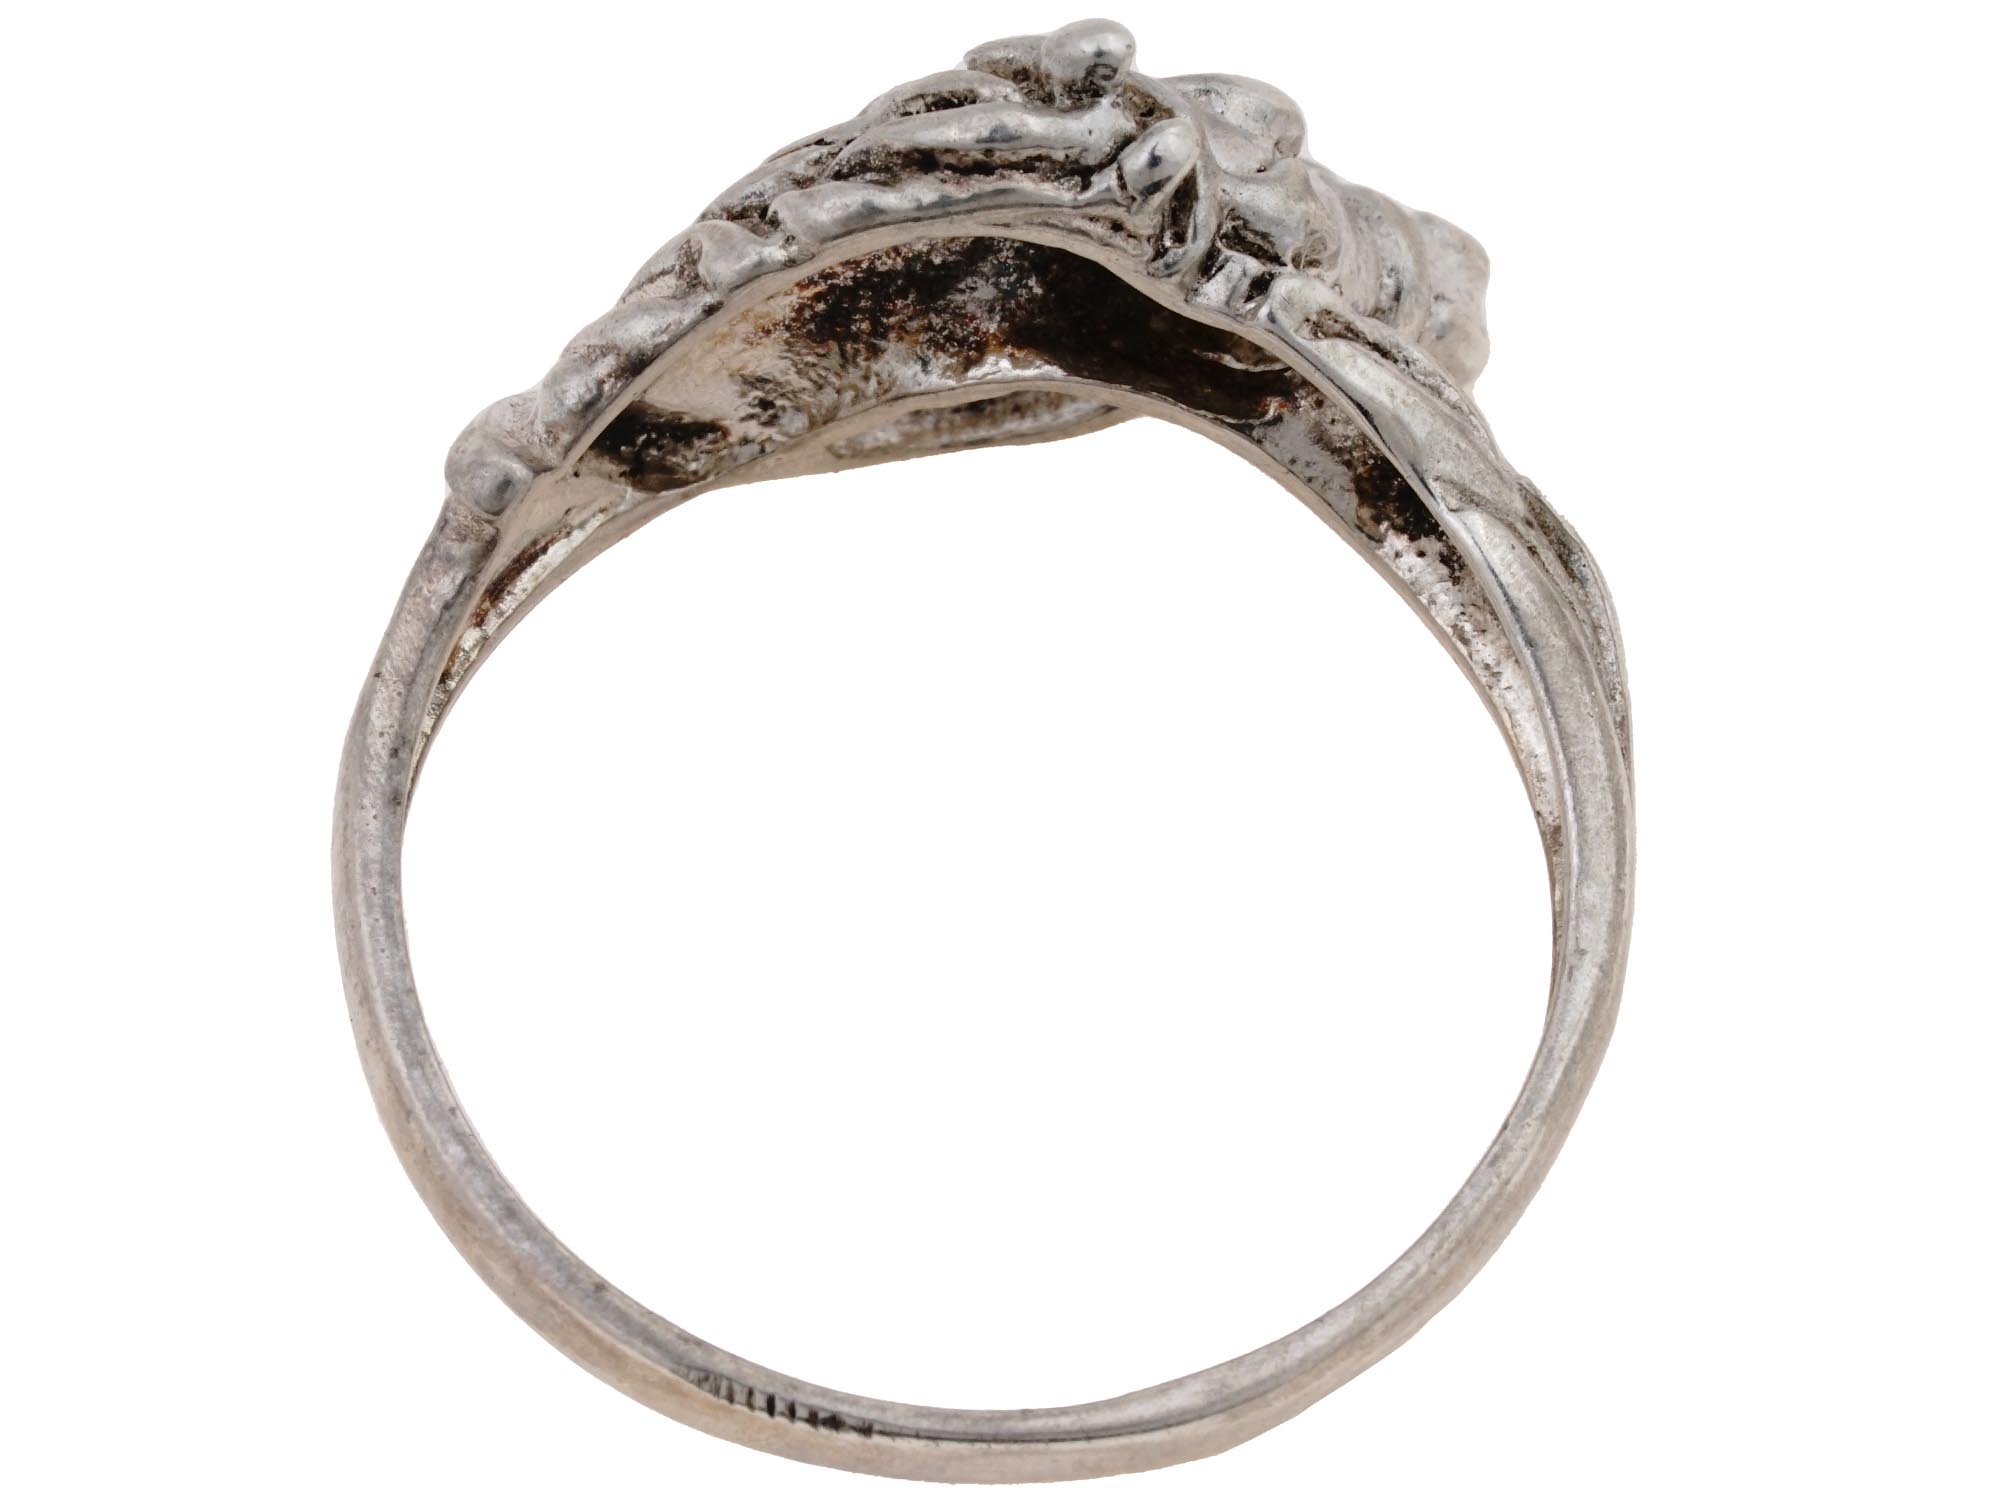 FIGURAL HORSE HEAD DESIGN STERLING SILVER RING PIC-6